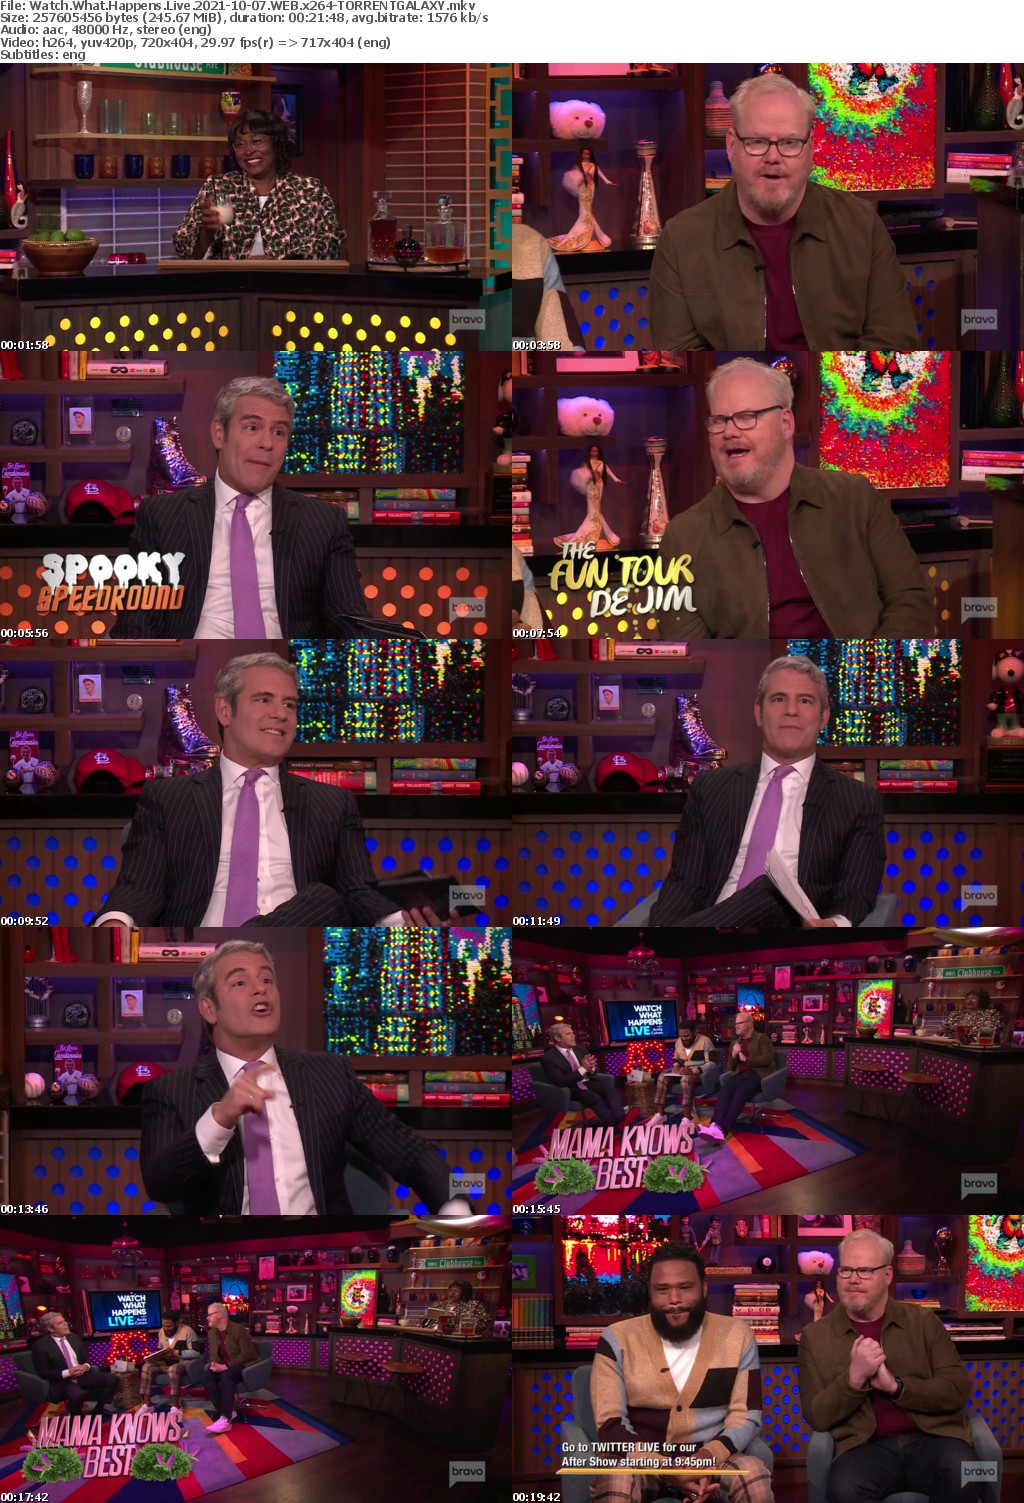 Watch What Happens Live 2021-10-07 WEB x264-GALAXY